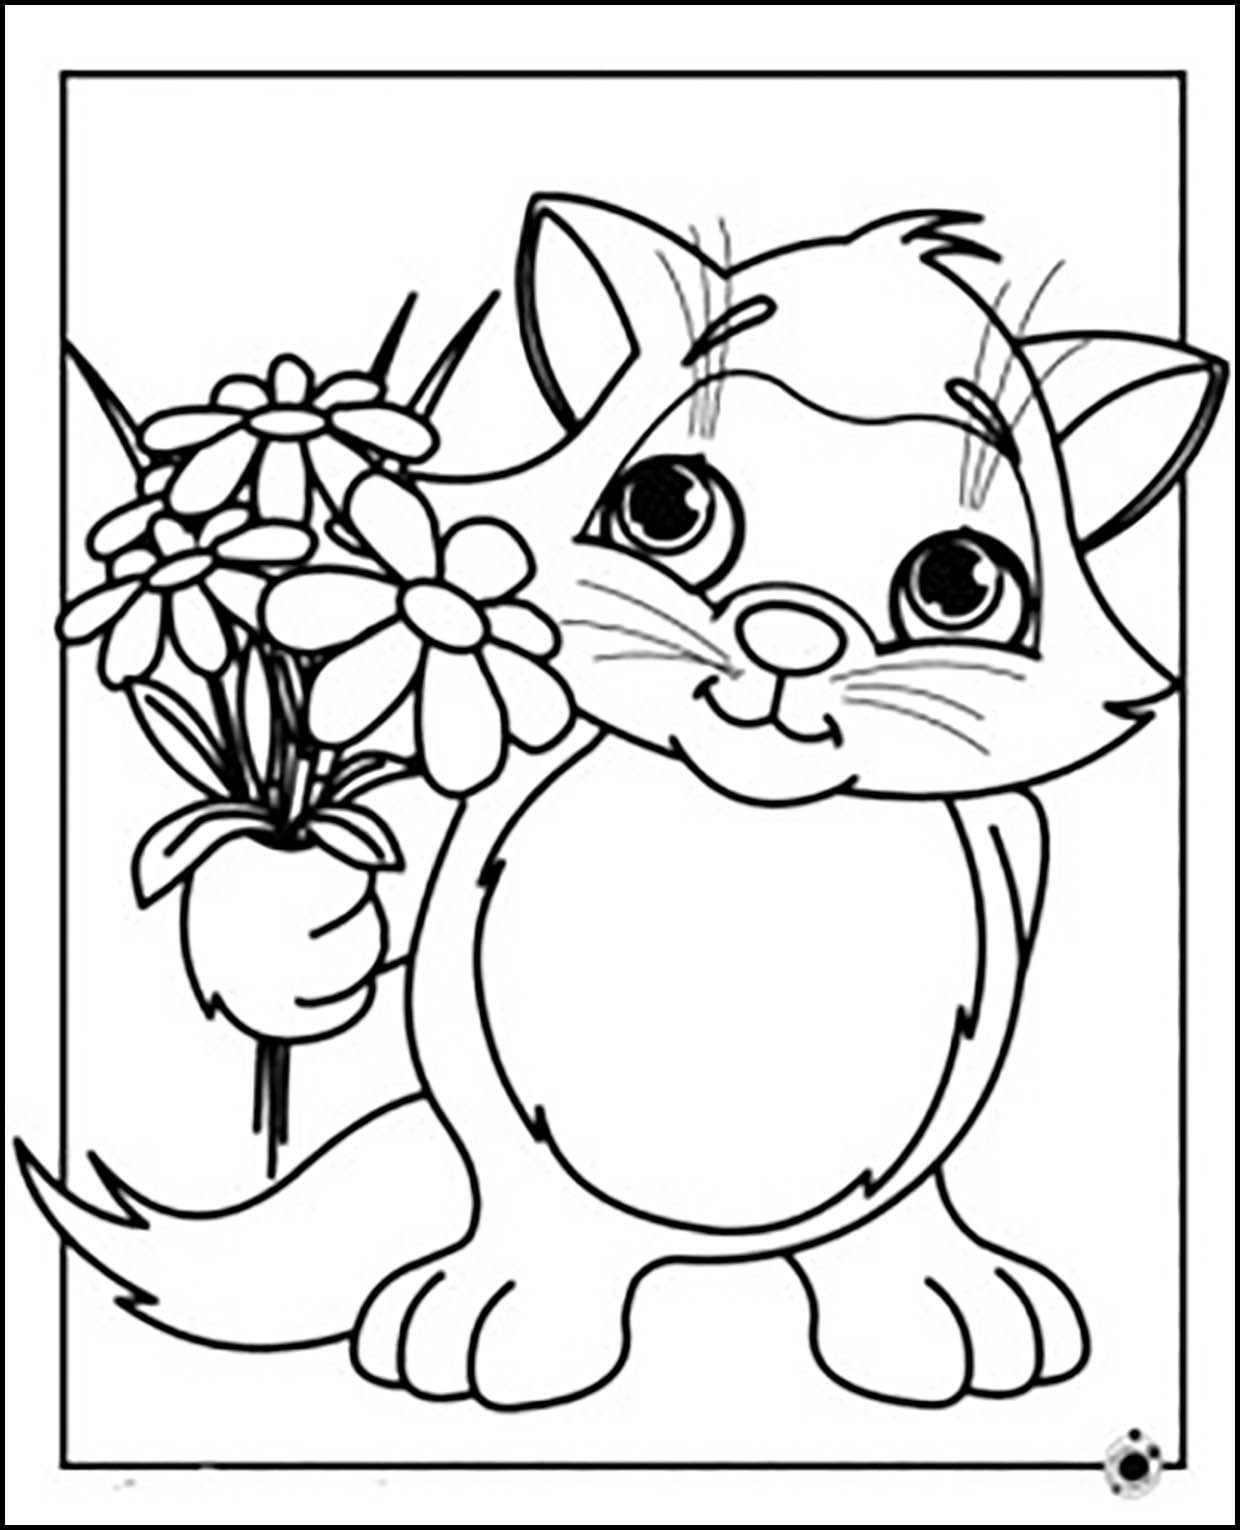 Cat with flowers